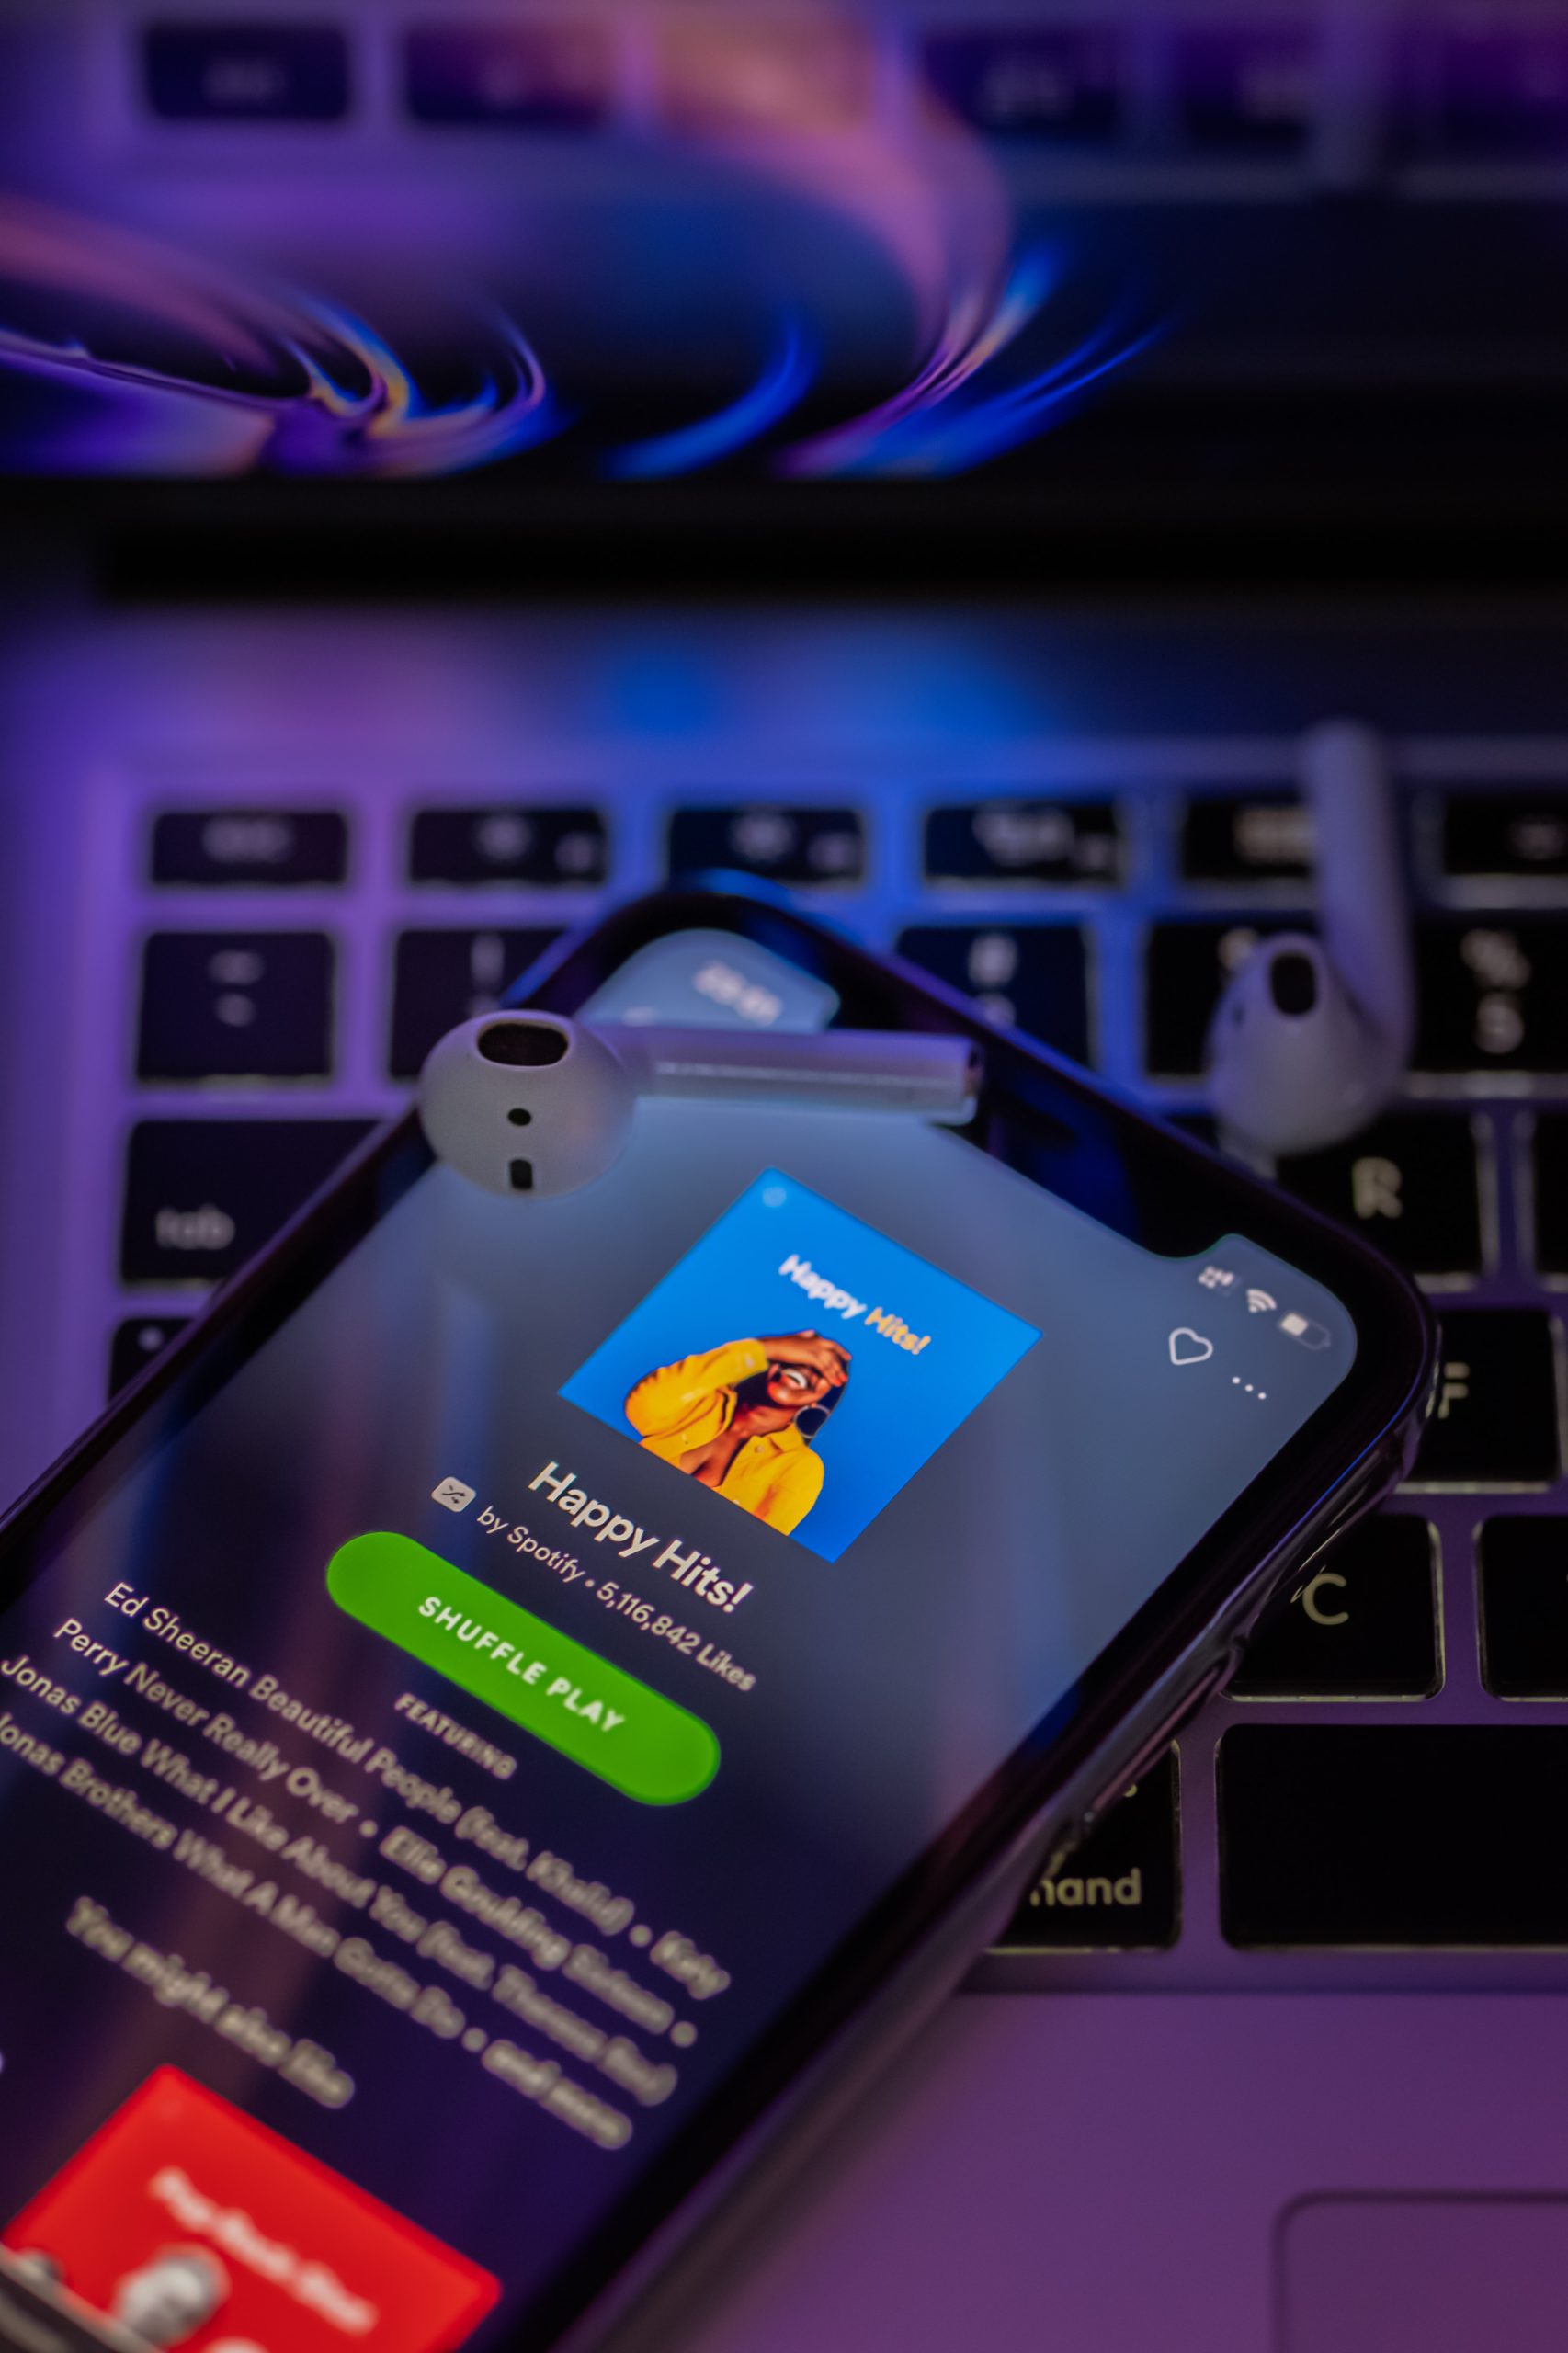 Spotify's Recommender system helps it personalize user experience